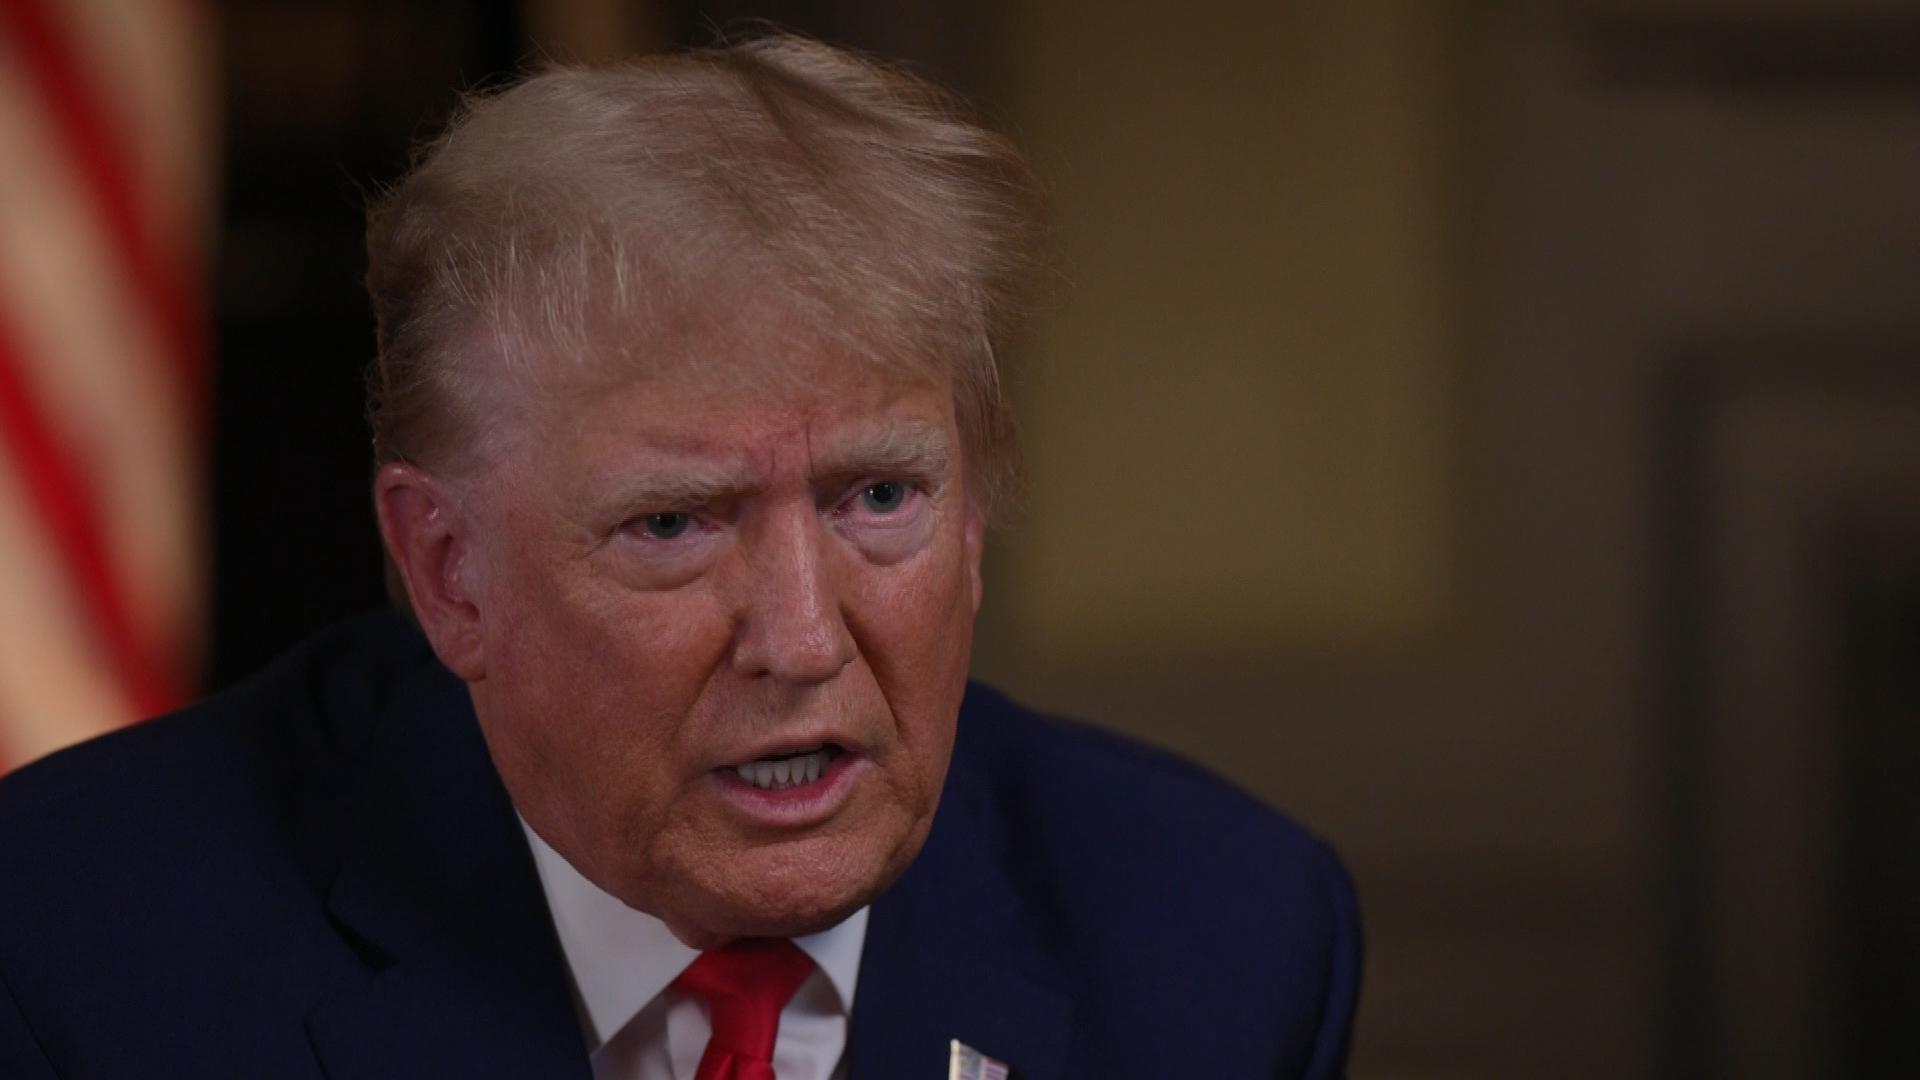 NBCUniversal objects to Trump's claims of documentary conspiracy (Credits: NBC News)